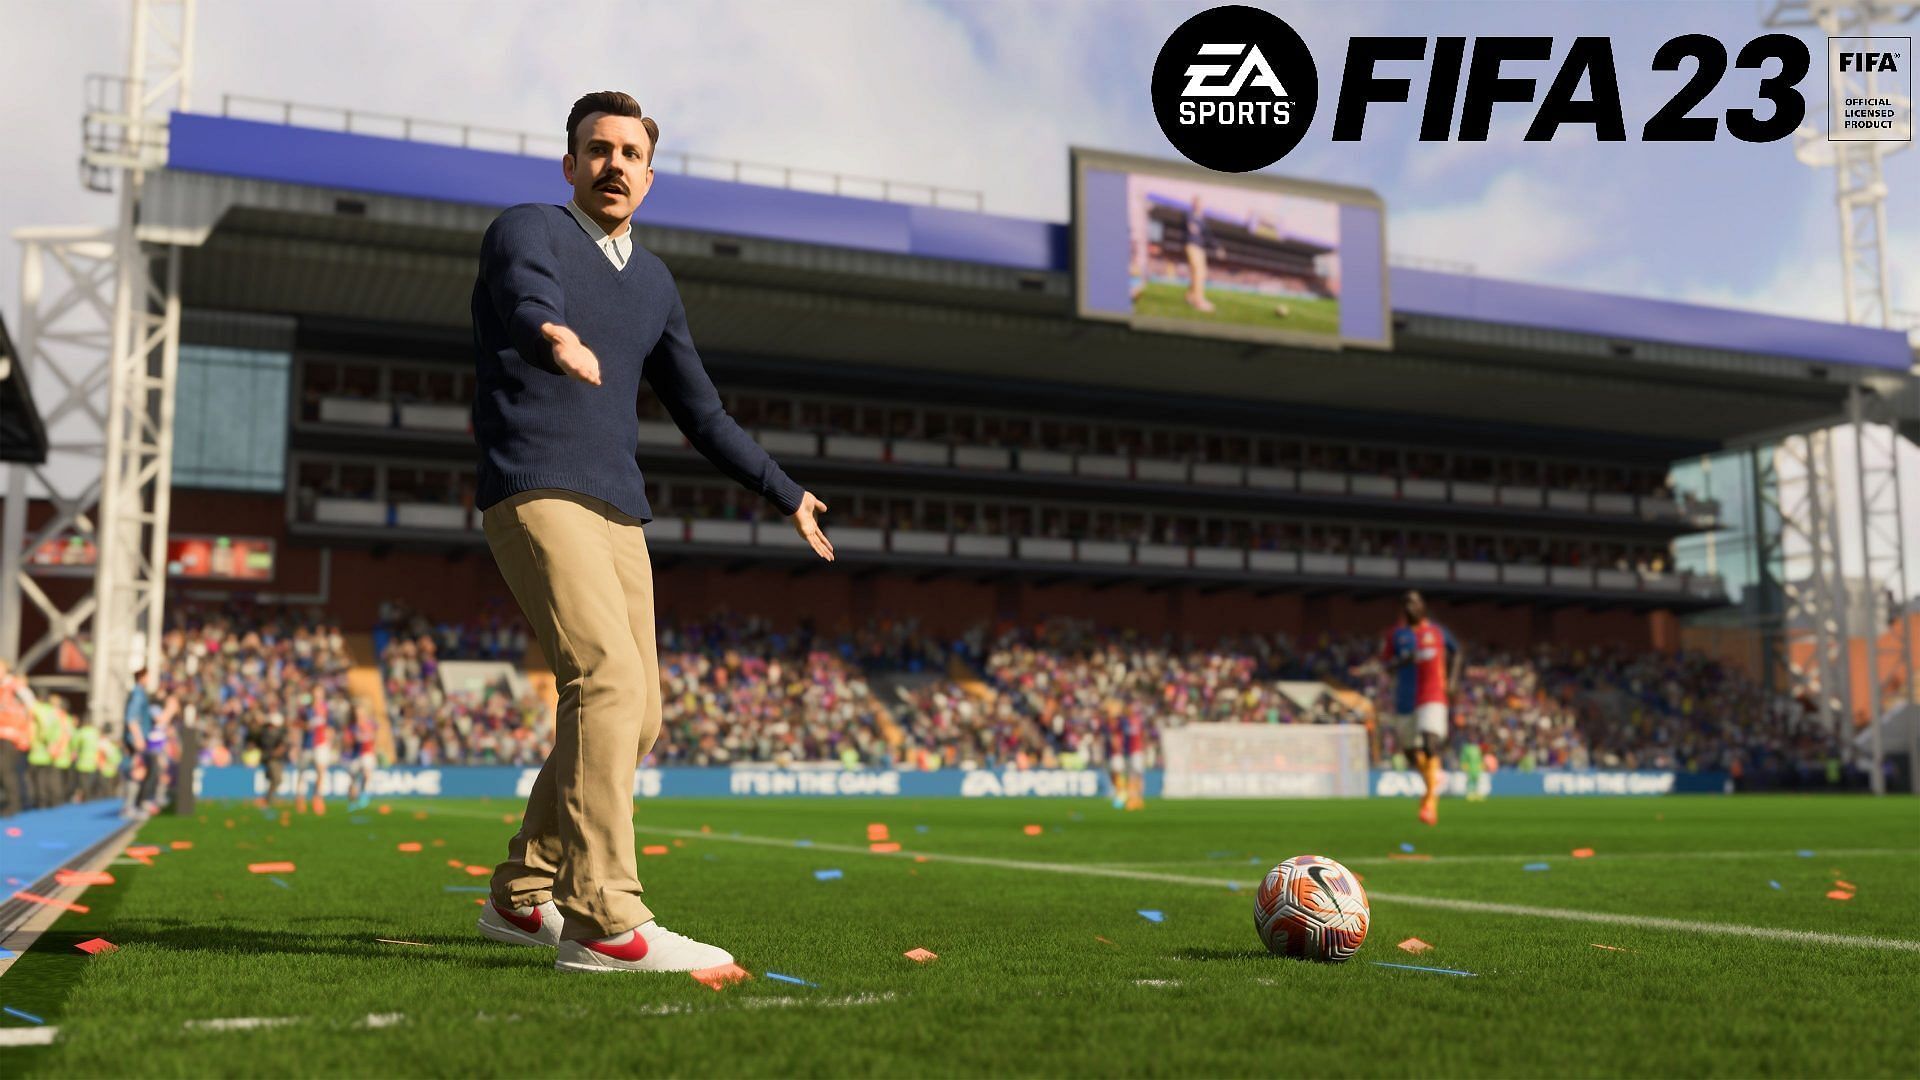 Now you can play as Ted Lasso in FIFA 23 (Image via EA Sports)